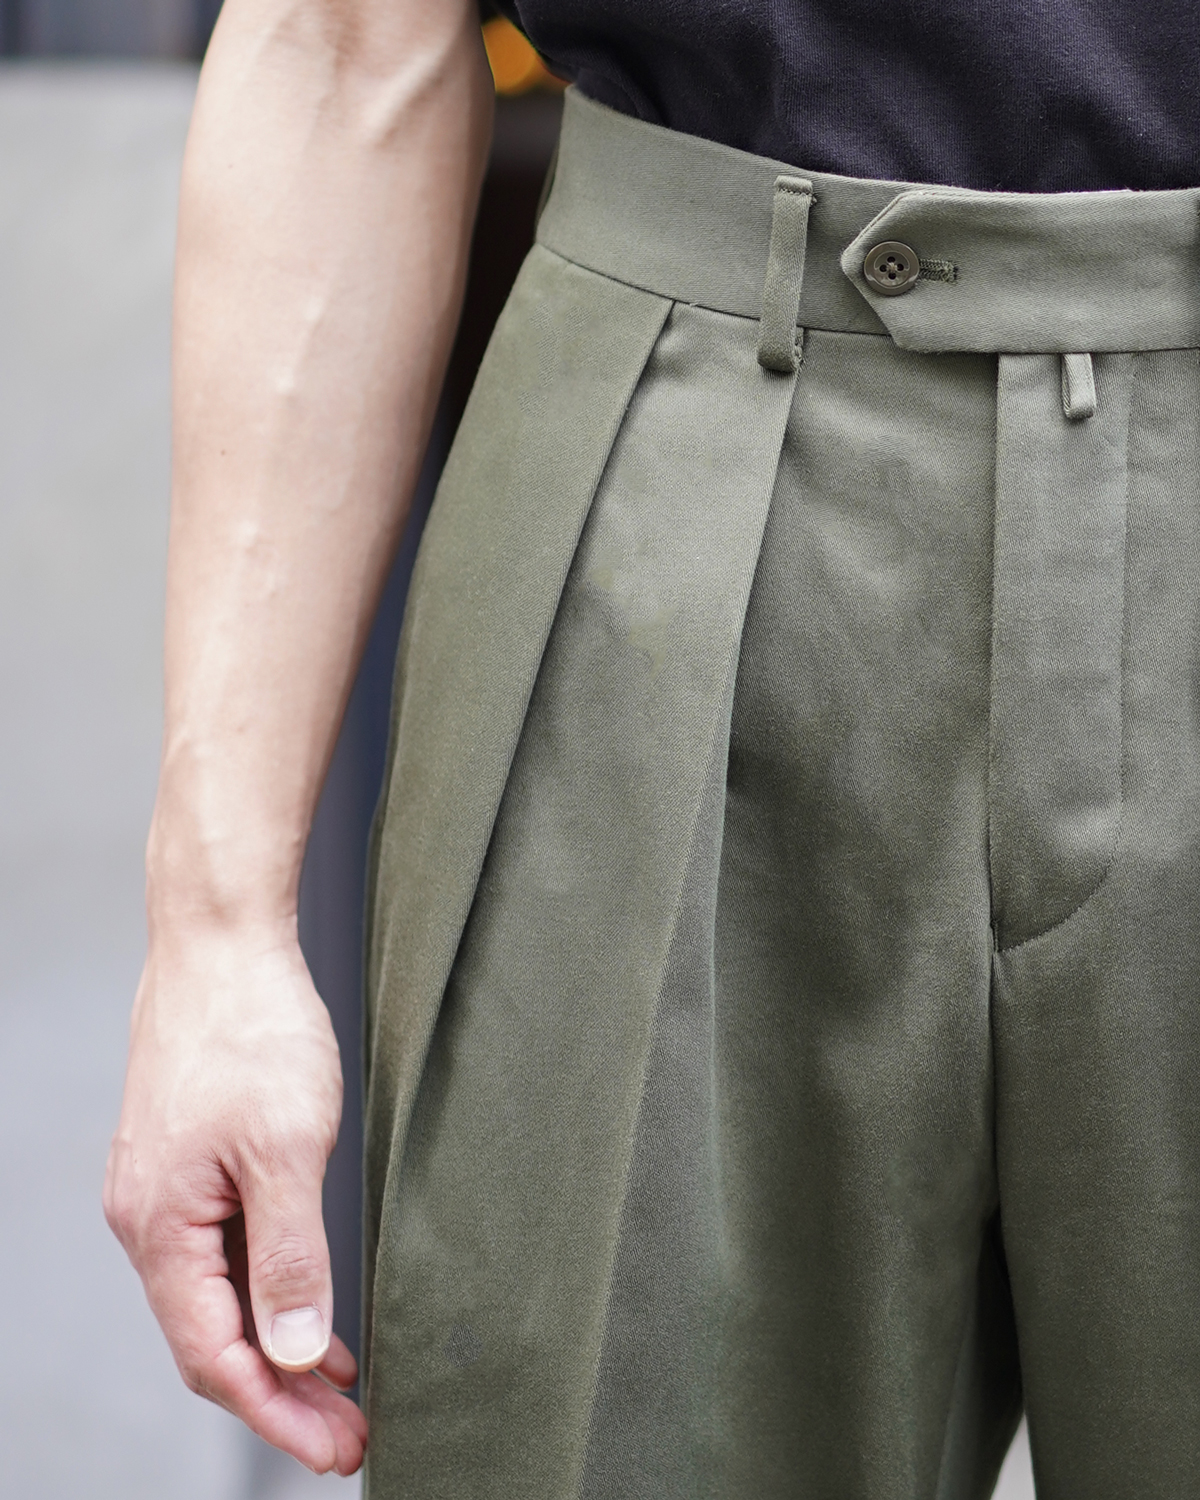 NEAT｜COTTON SATIN │WIDE - OLIVE｜PRODUCT｜Continuer Inc.｜メガネ ...